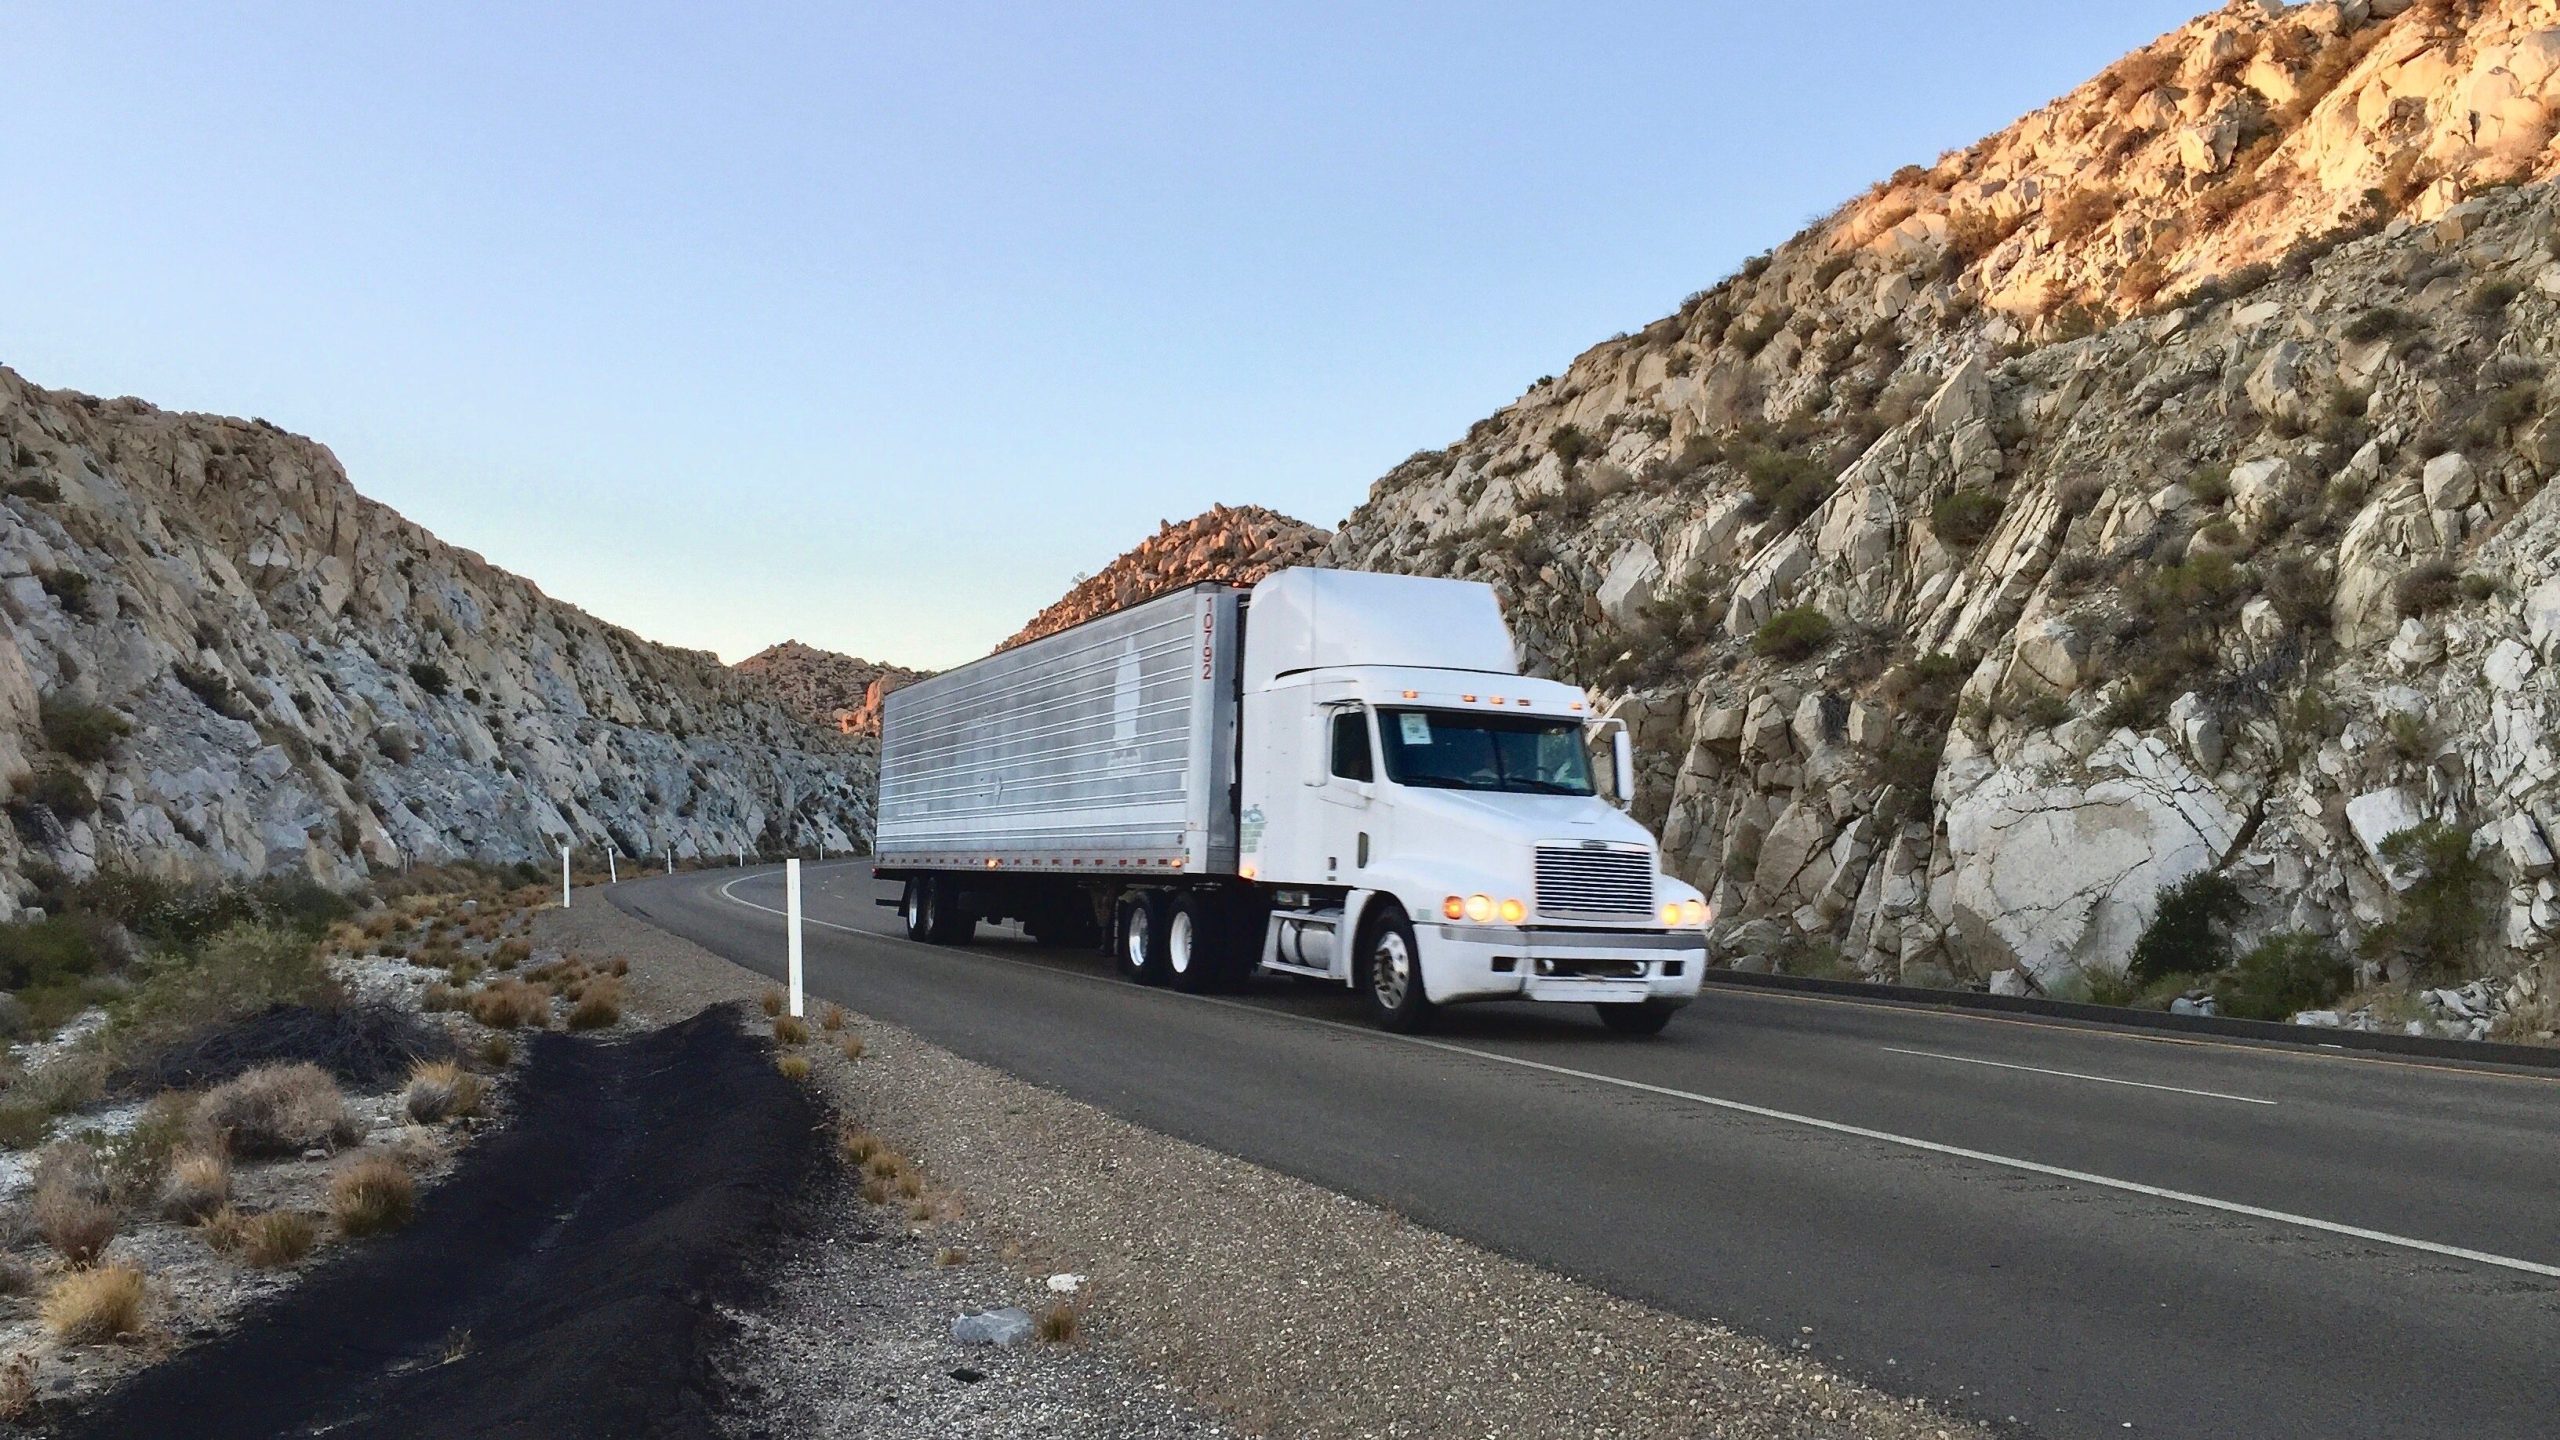 White semi-truck hauling a trailer on a desert road, showcasing efficient partial truckload shipping in a rugged landscape